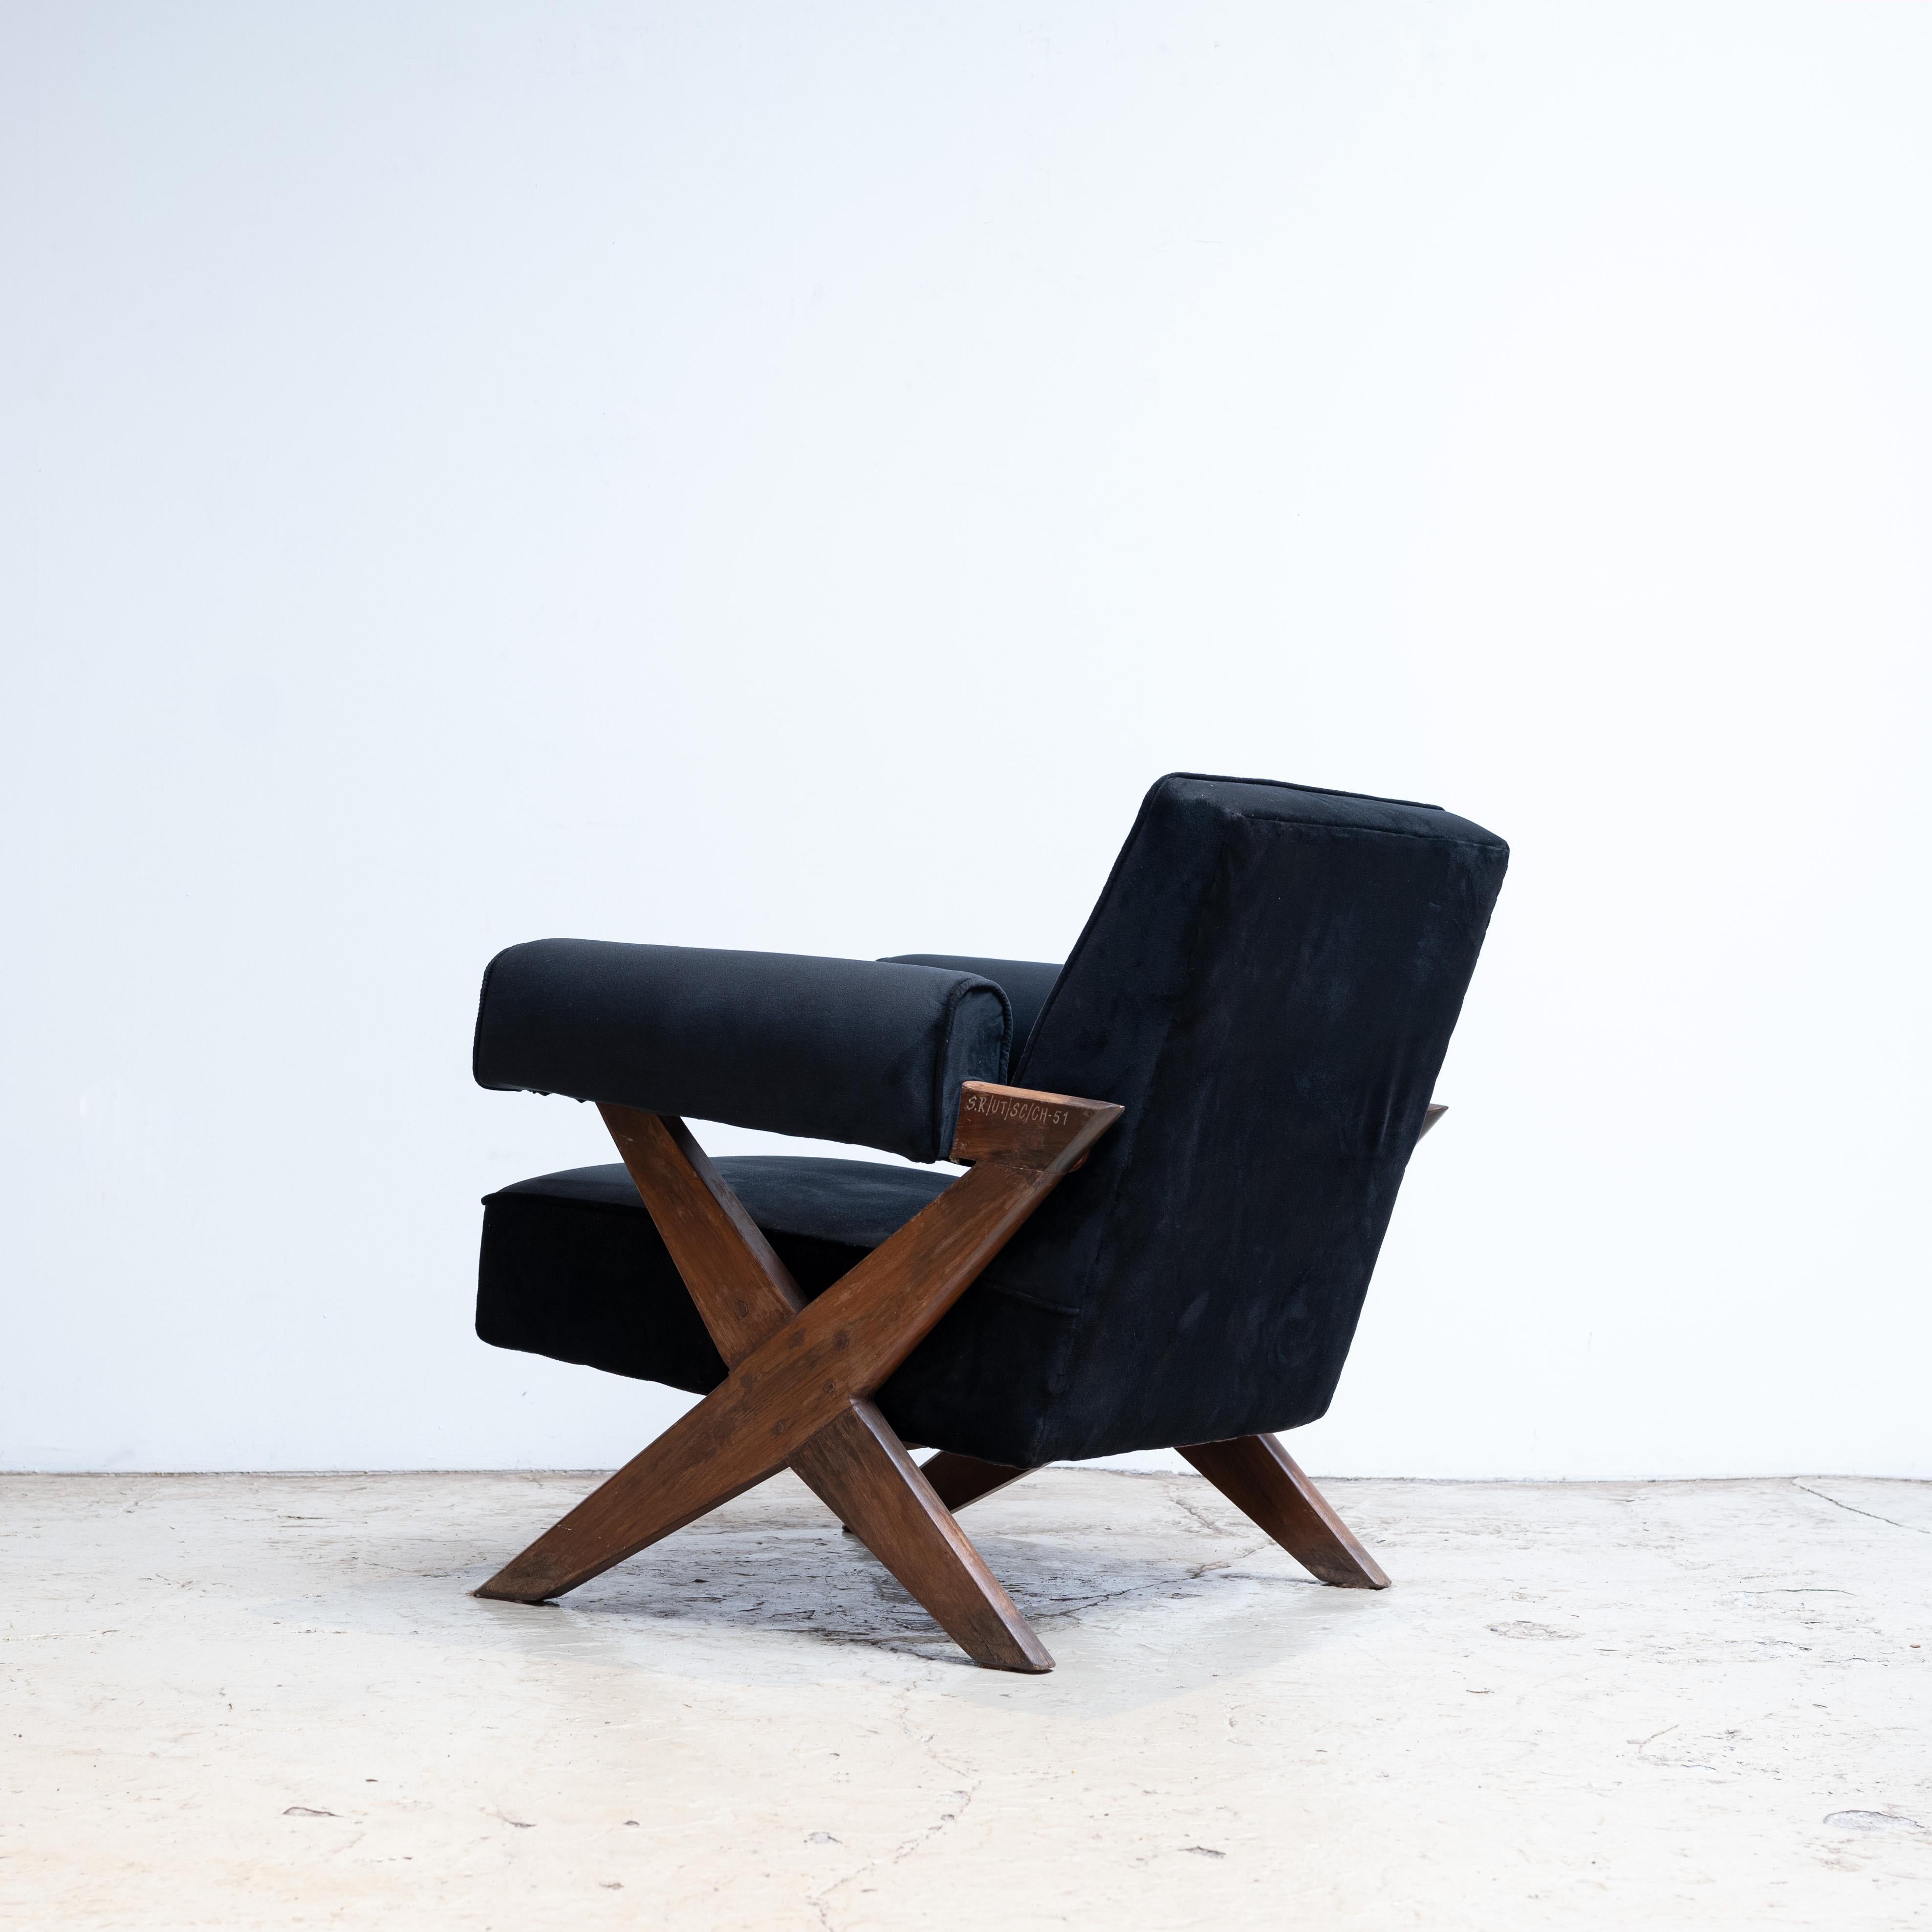 Mid-20th Century Pierre Jeanneret X-Leg Upholstered Lounge Chair, Circa 1960, Chandigarh, India For Sale